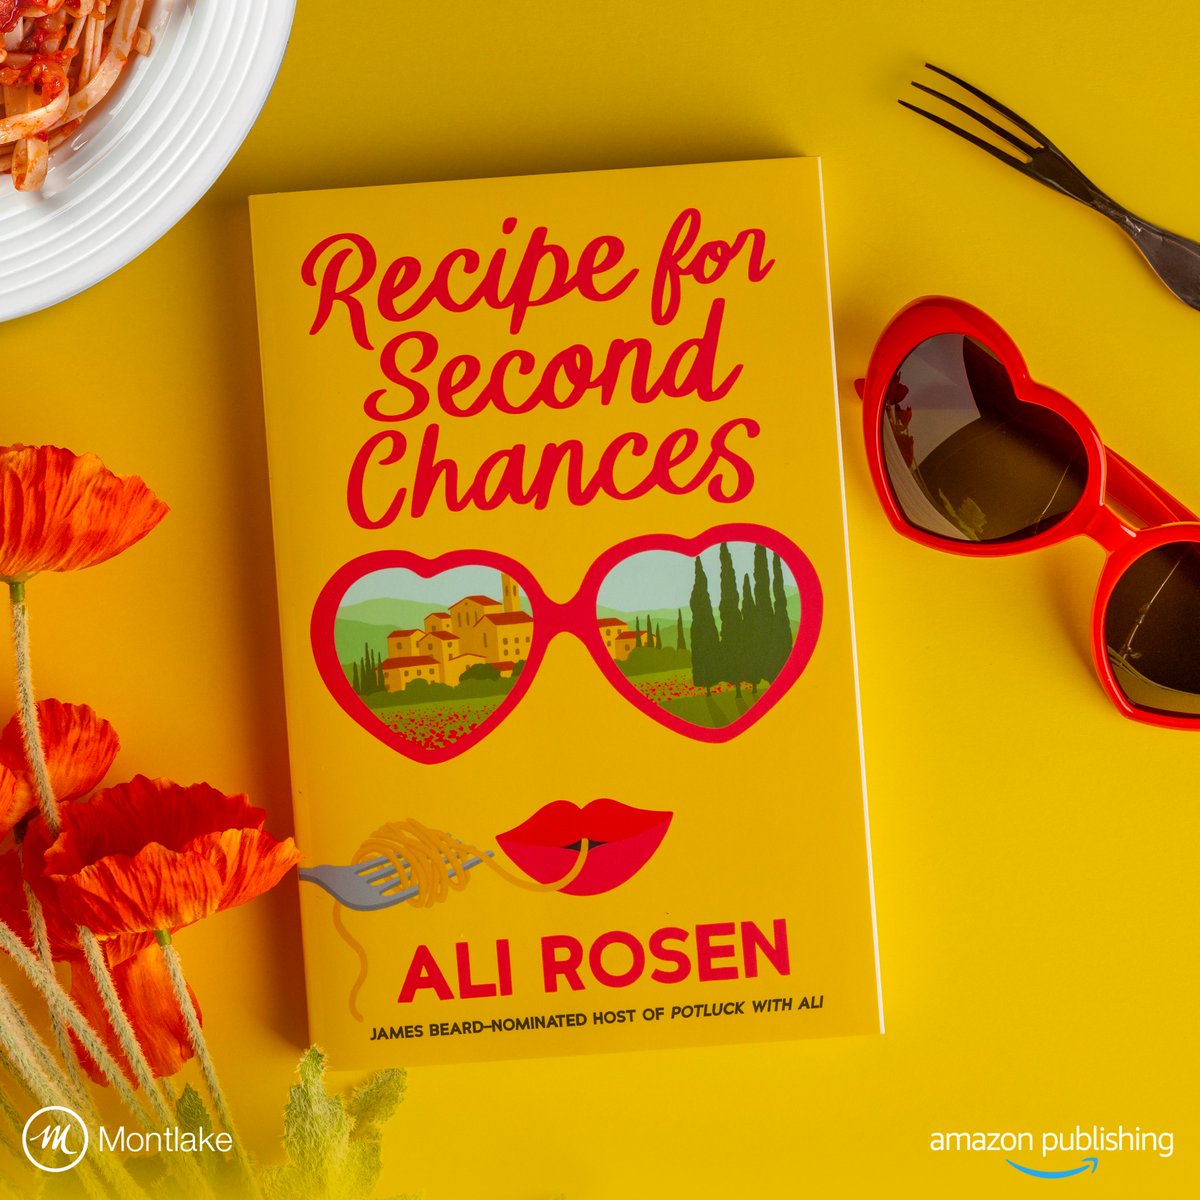 Playing it safe has always been in her rule book… but maybe he’s worth the risk. Don’t miss this delicious second-chance romance from debut author @Ali_Rosen. Amazon.com/RecipeForSecon…